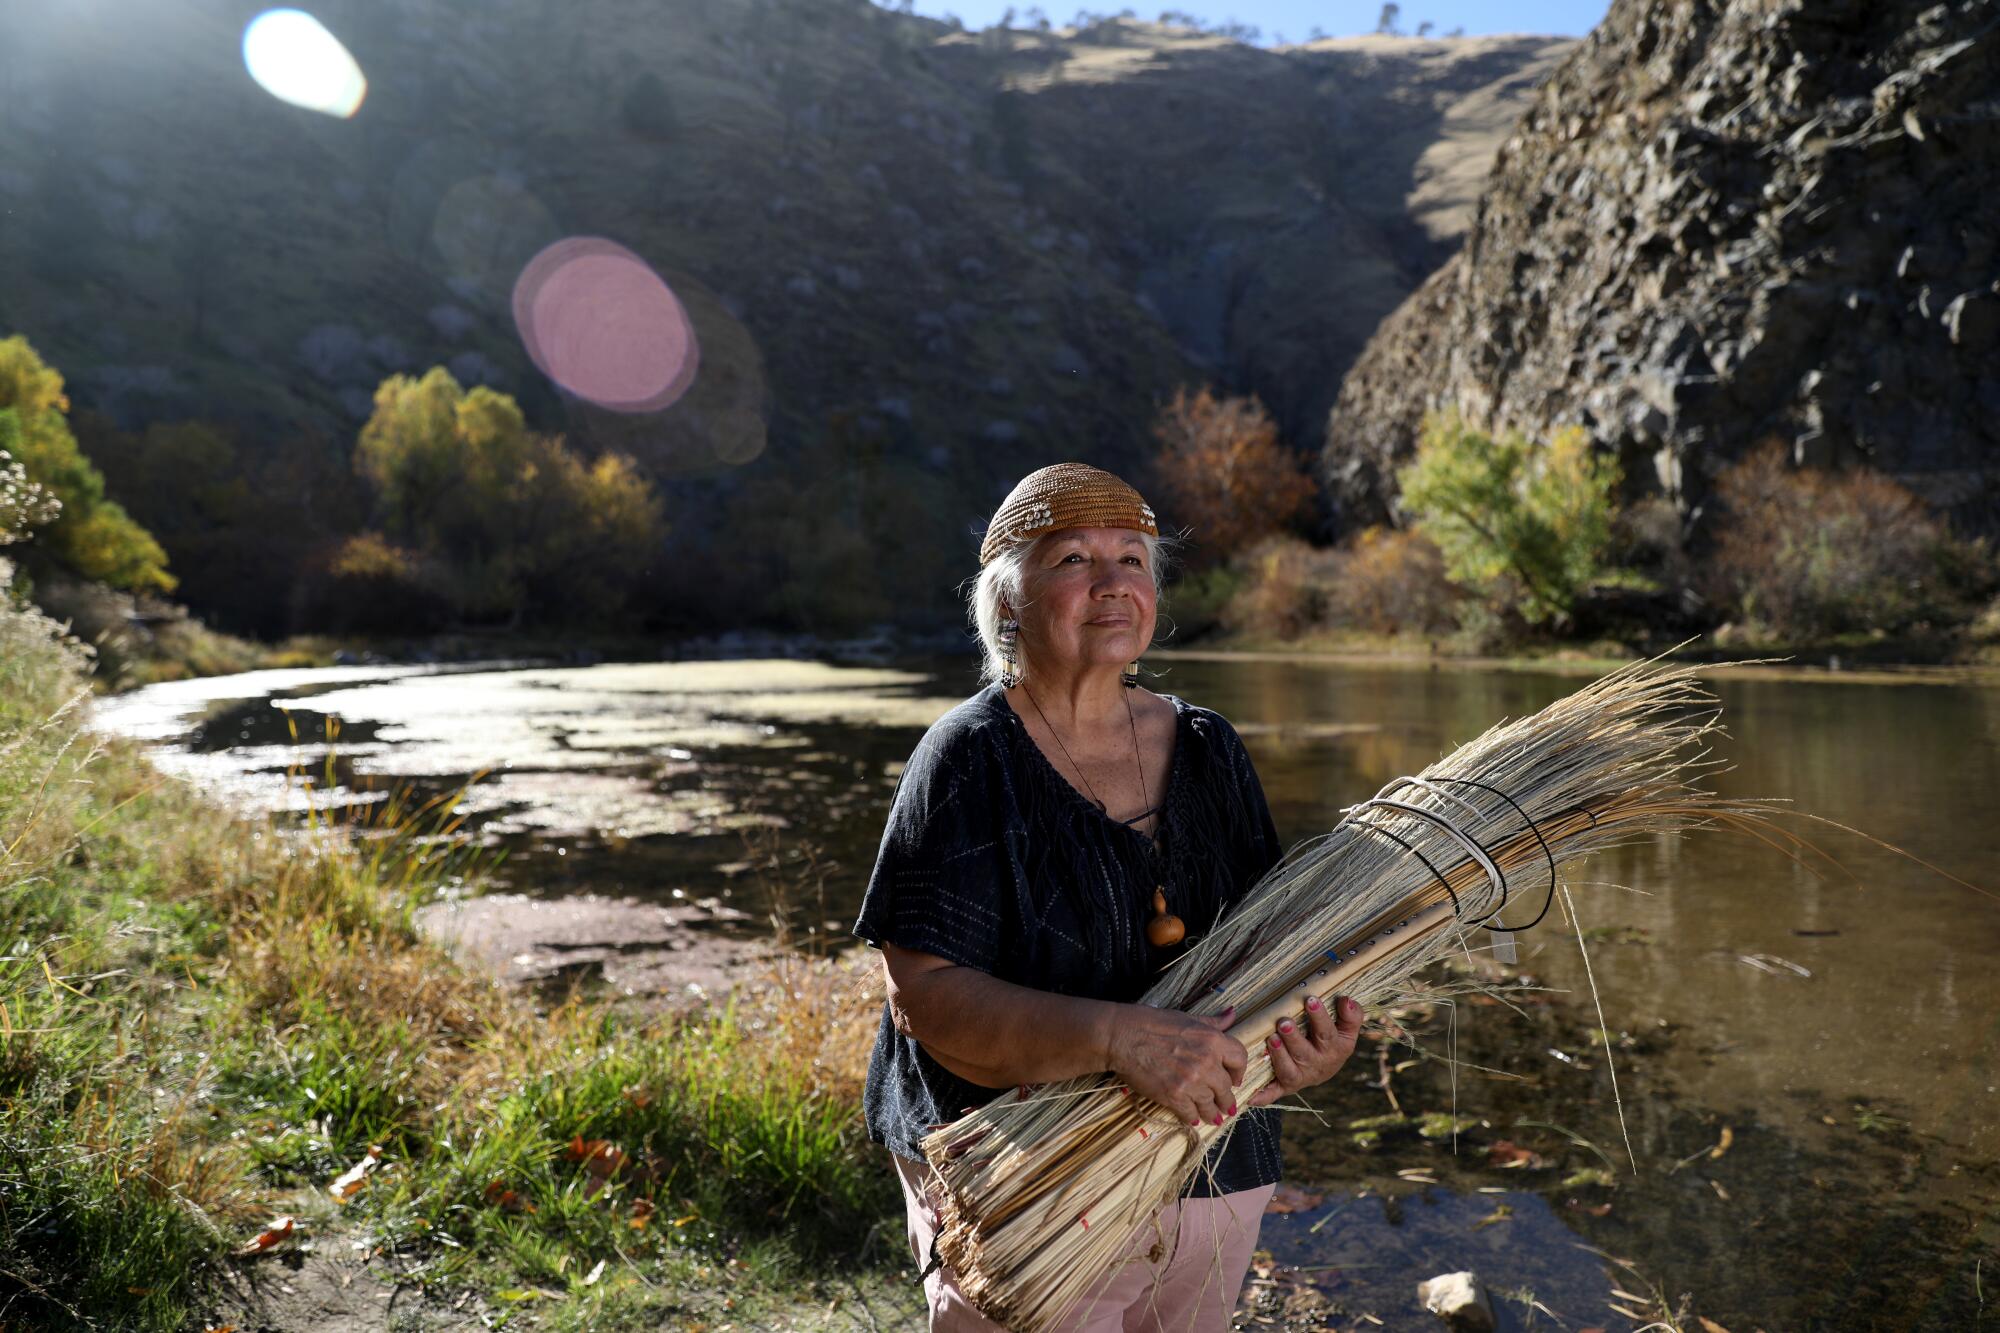 A woman stands beside a river holding reeds.